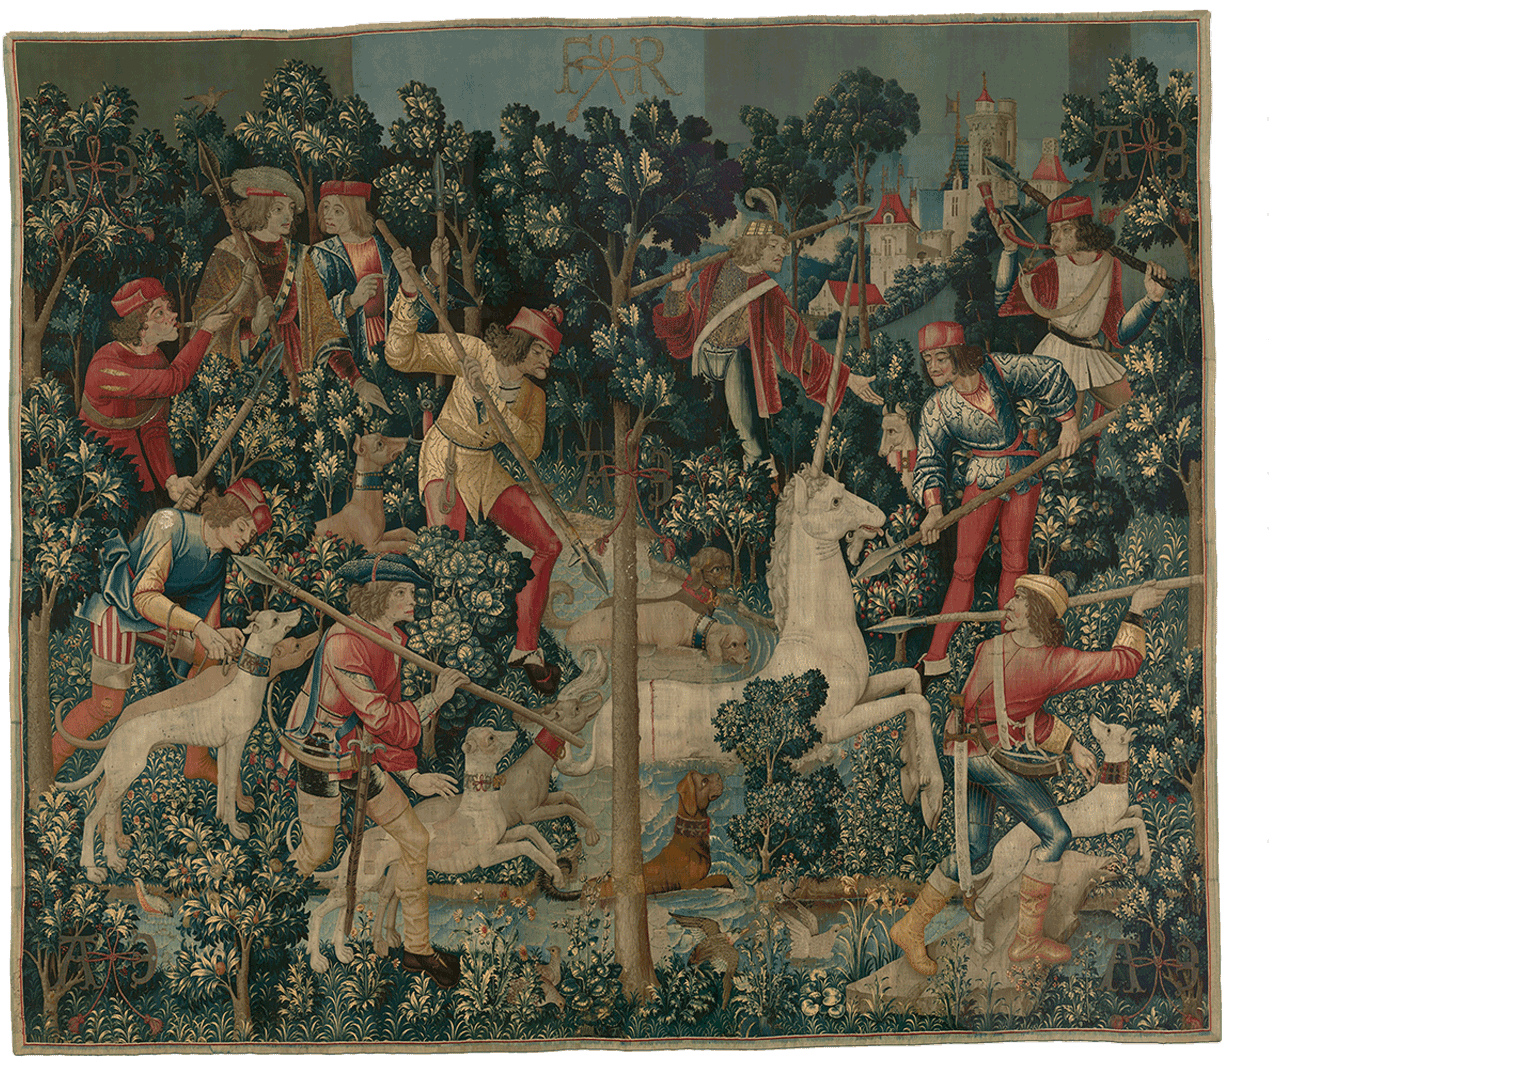 The chase is on. The hunters stab the unicorn with their spears as it flees through the water. Still, even in this violent tapestry the unicorn is depicted as a majestic creature.